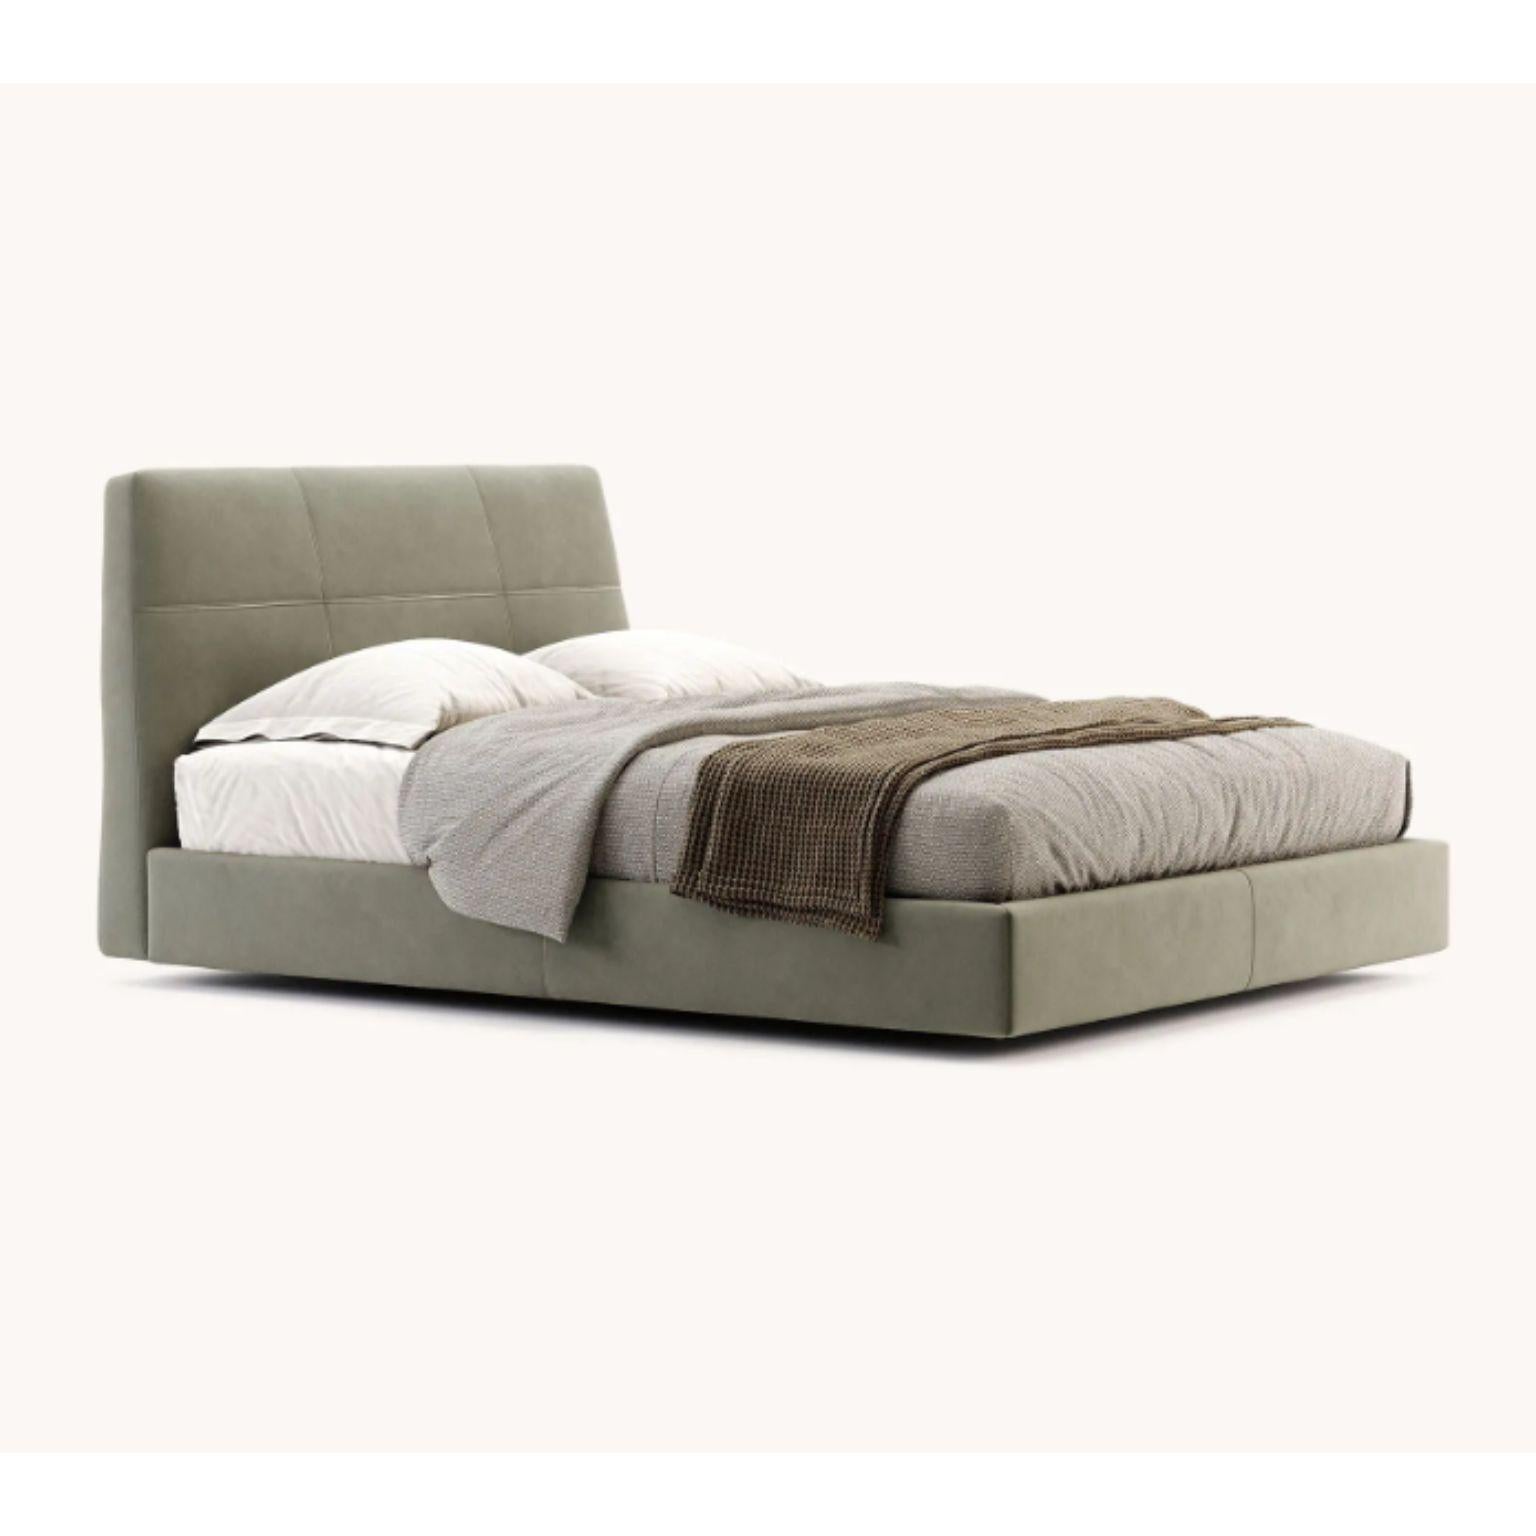 Queen Size Shelby bed by Domkapa
Dimensions: W 172 x D 232 x H 109 cm.
Materials: Microfiber (Tarn 22, Tarn 02).
Also available in different materials.

The unique Shelby bed is a sophisticated bed inspired by the geometric lines, angles, and